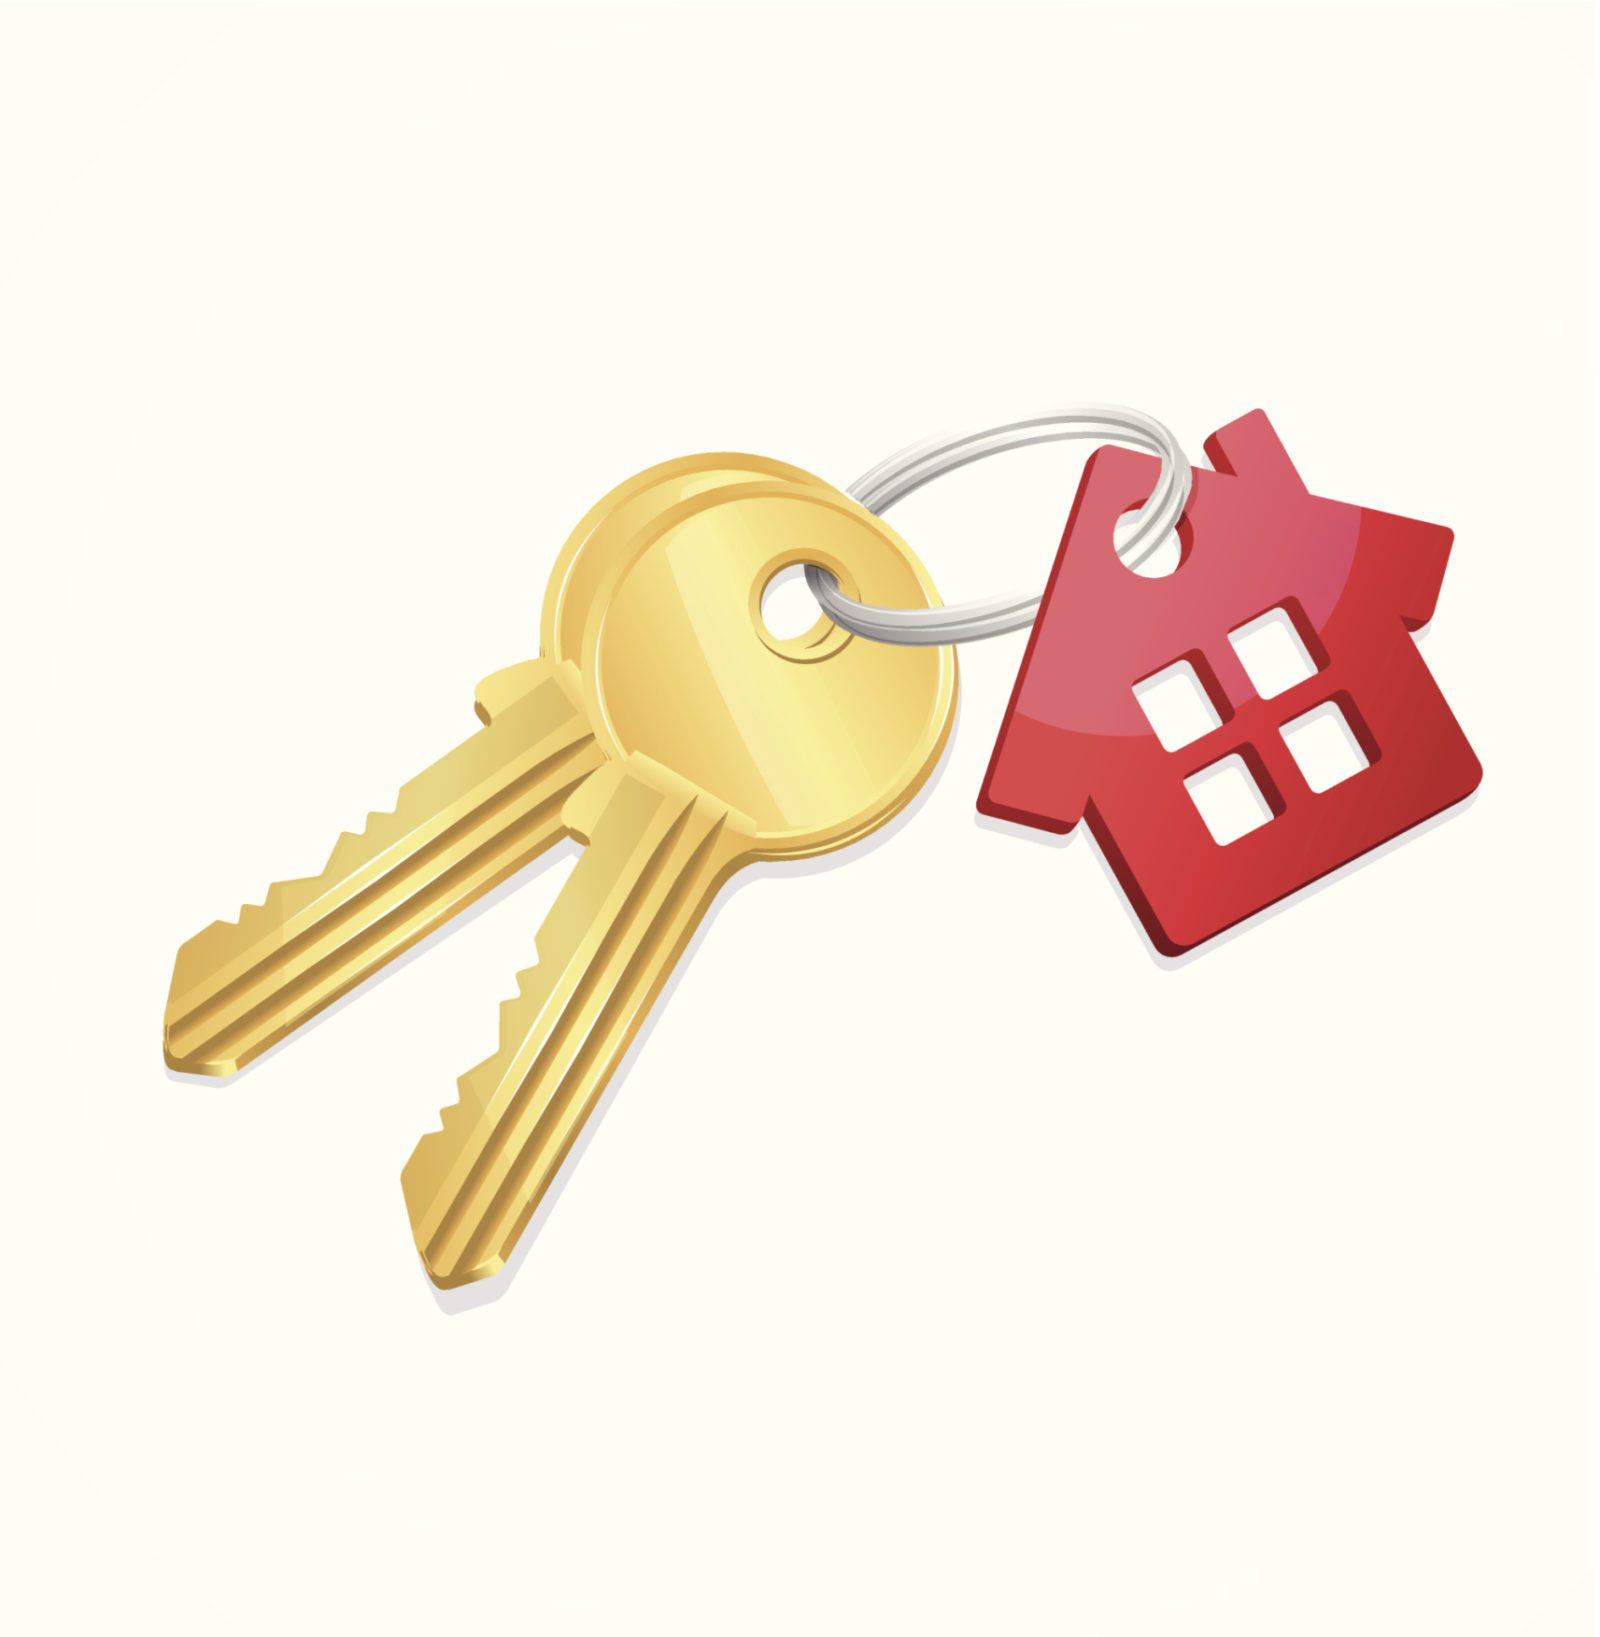 House Keys with a red keychain